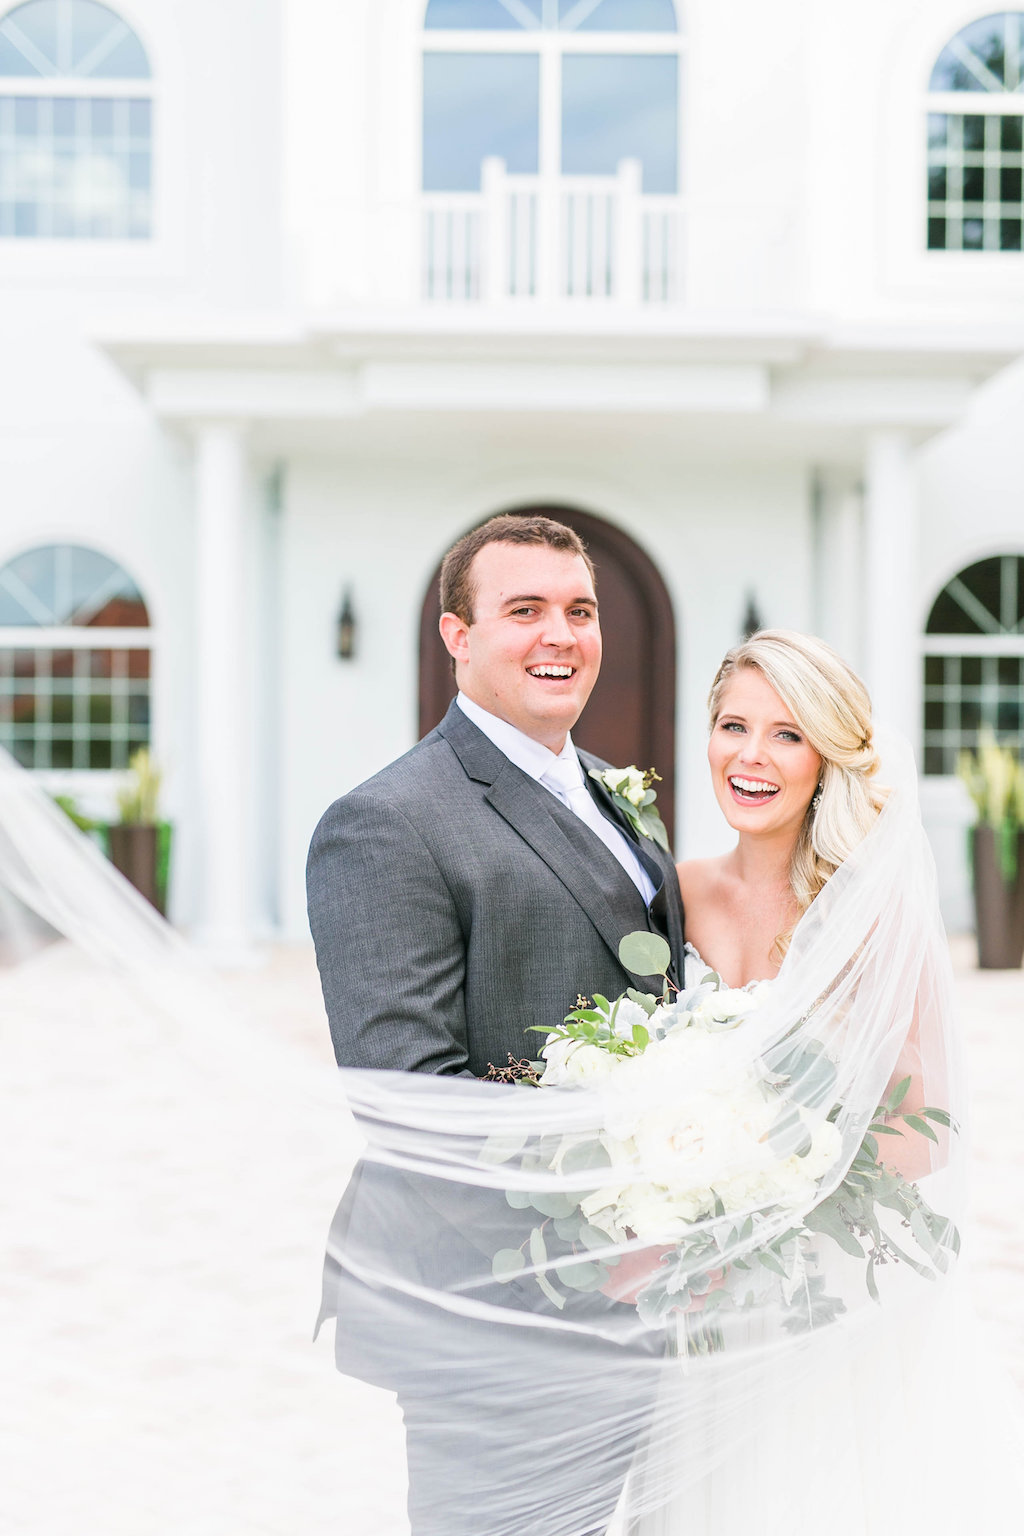 Florida Outdoor Bride and Groom Wedding Portrait with Veil Blowing in Wind | Clearwater Wedding Ceremony Venue Harborside Chapel | Tampa Bay Hair and Makeup Femme Akoi